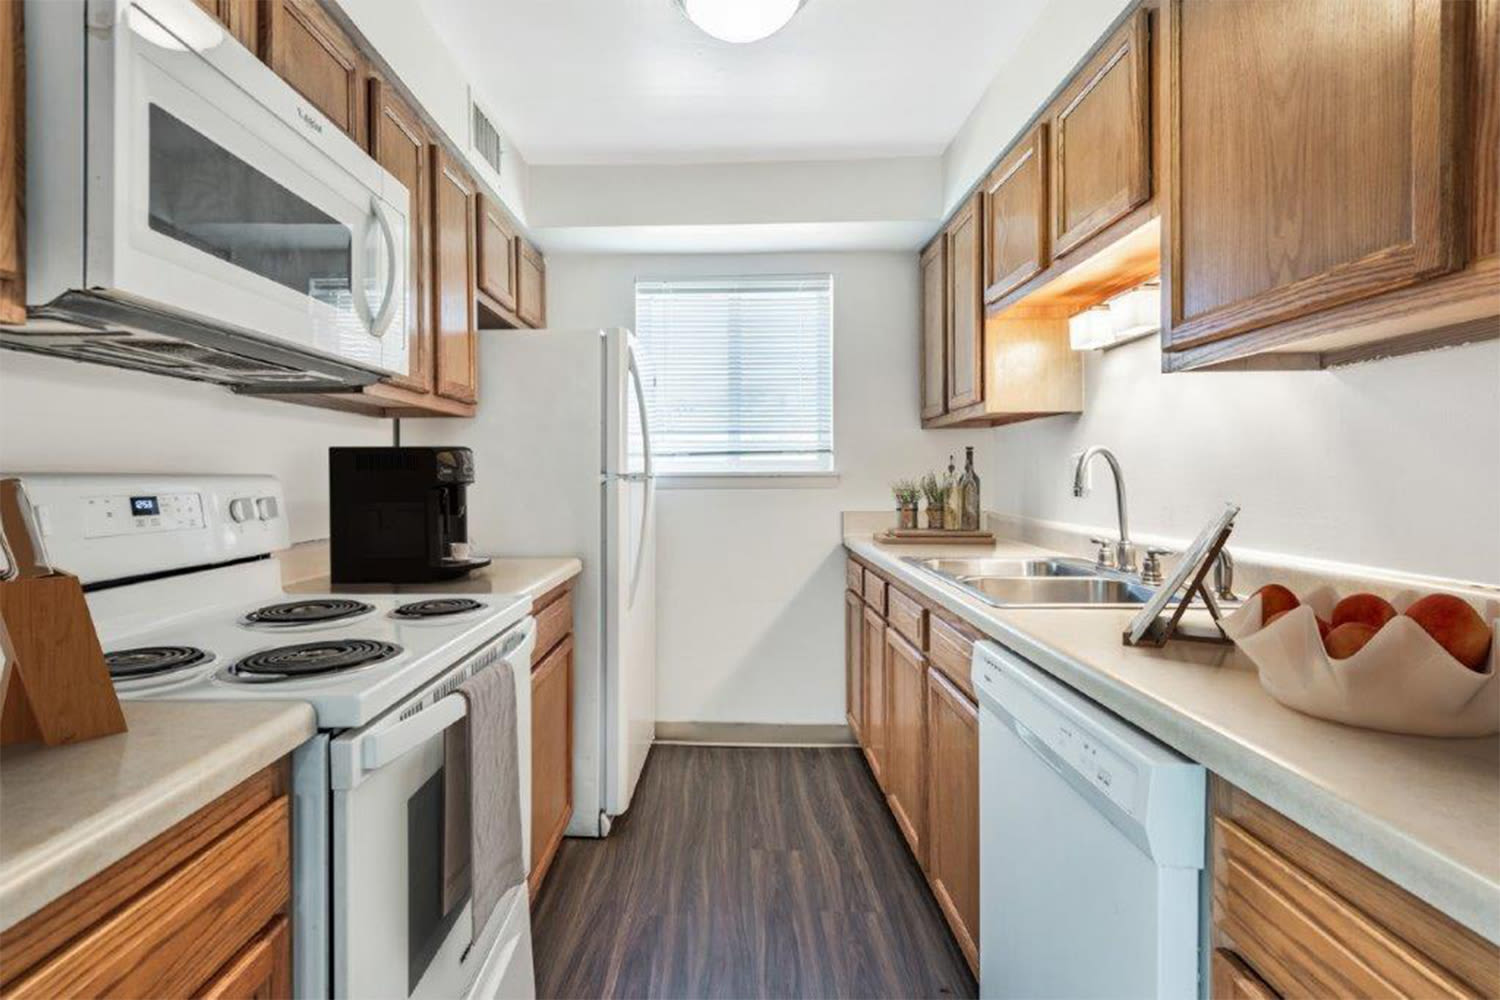 Spacious kitchen at Crossroads Apartments & Townhomes in Spencerport, New York.